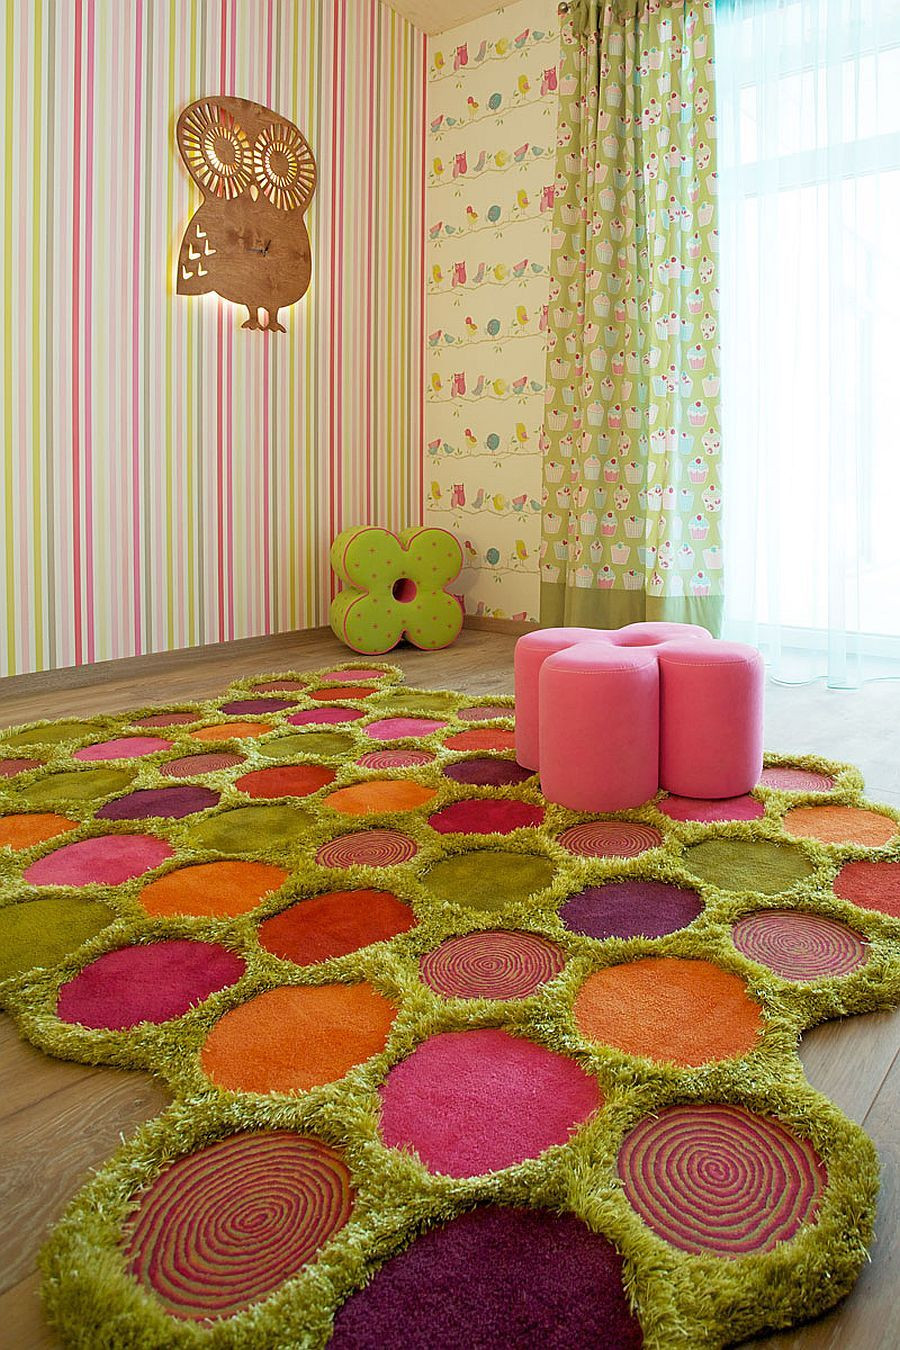 Best Rugs For Kids Room
 Colorful Zest 25 Eye Catching Rug Ideas for Kids’ Rooms